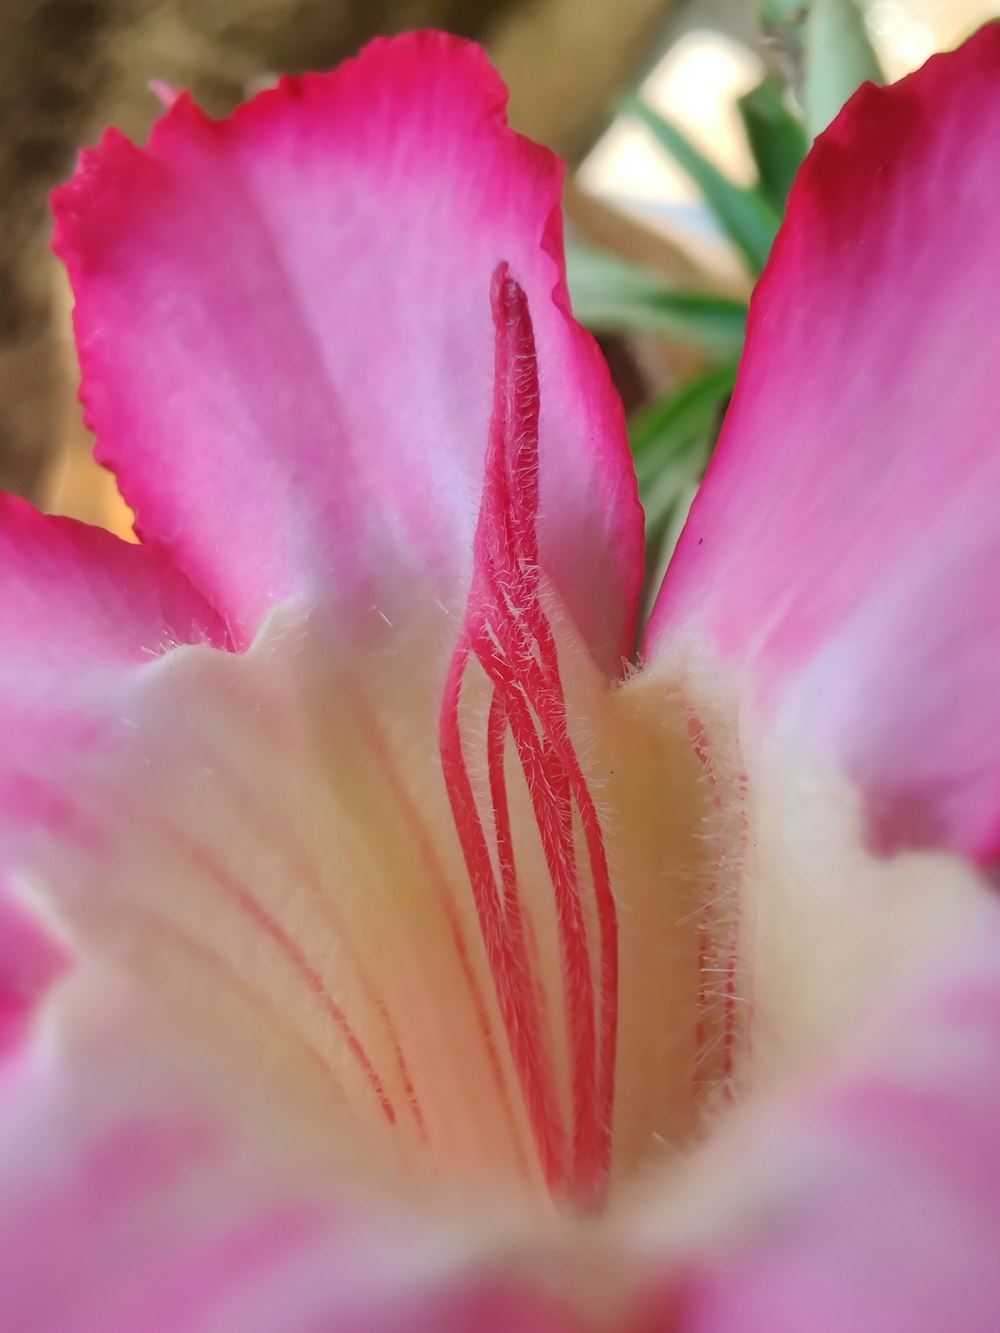 pink and white flower in macro photography